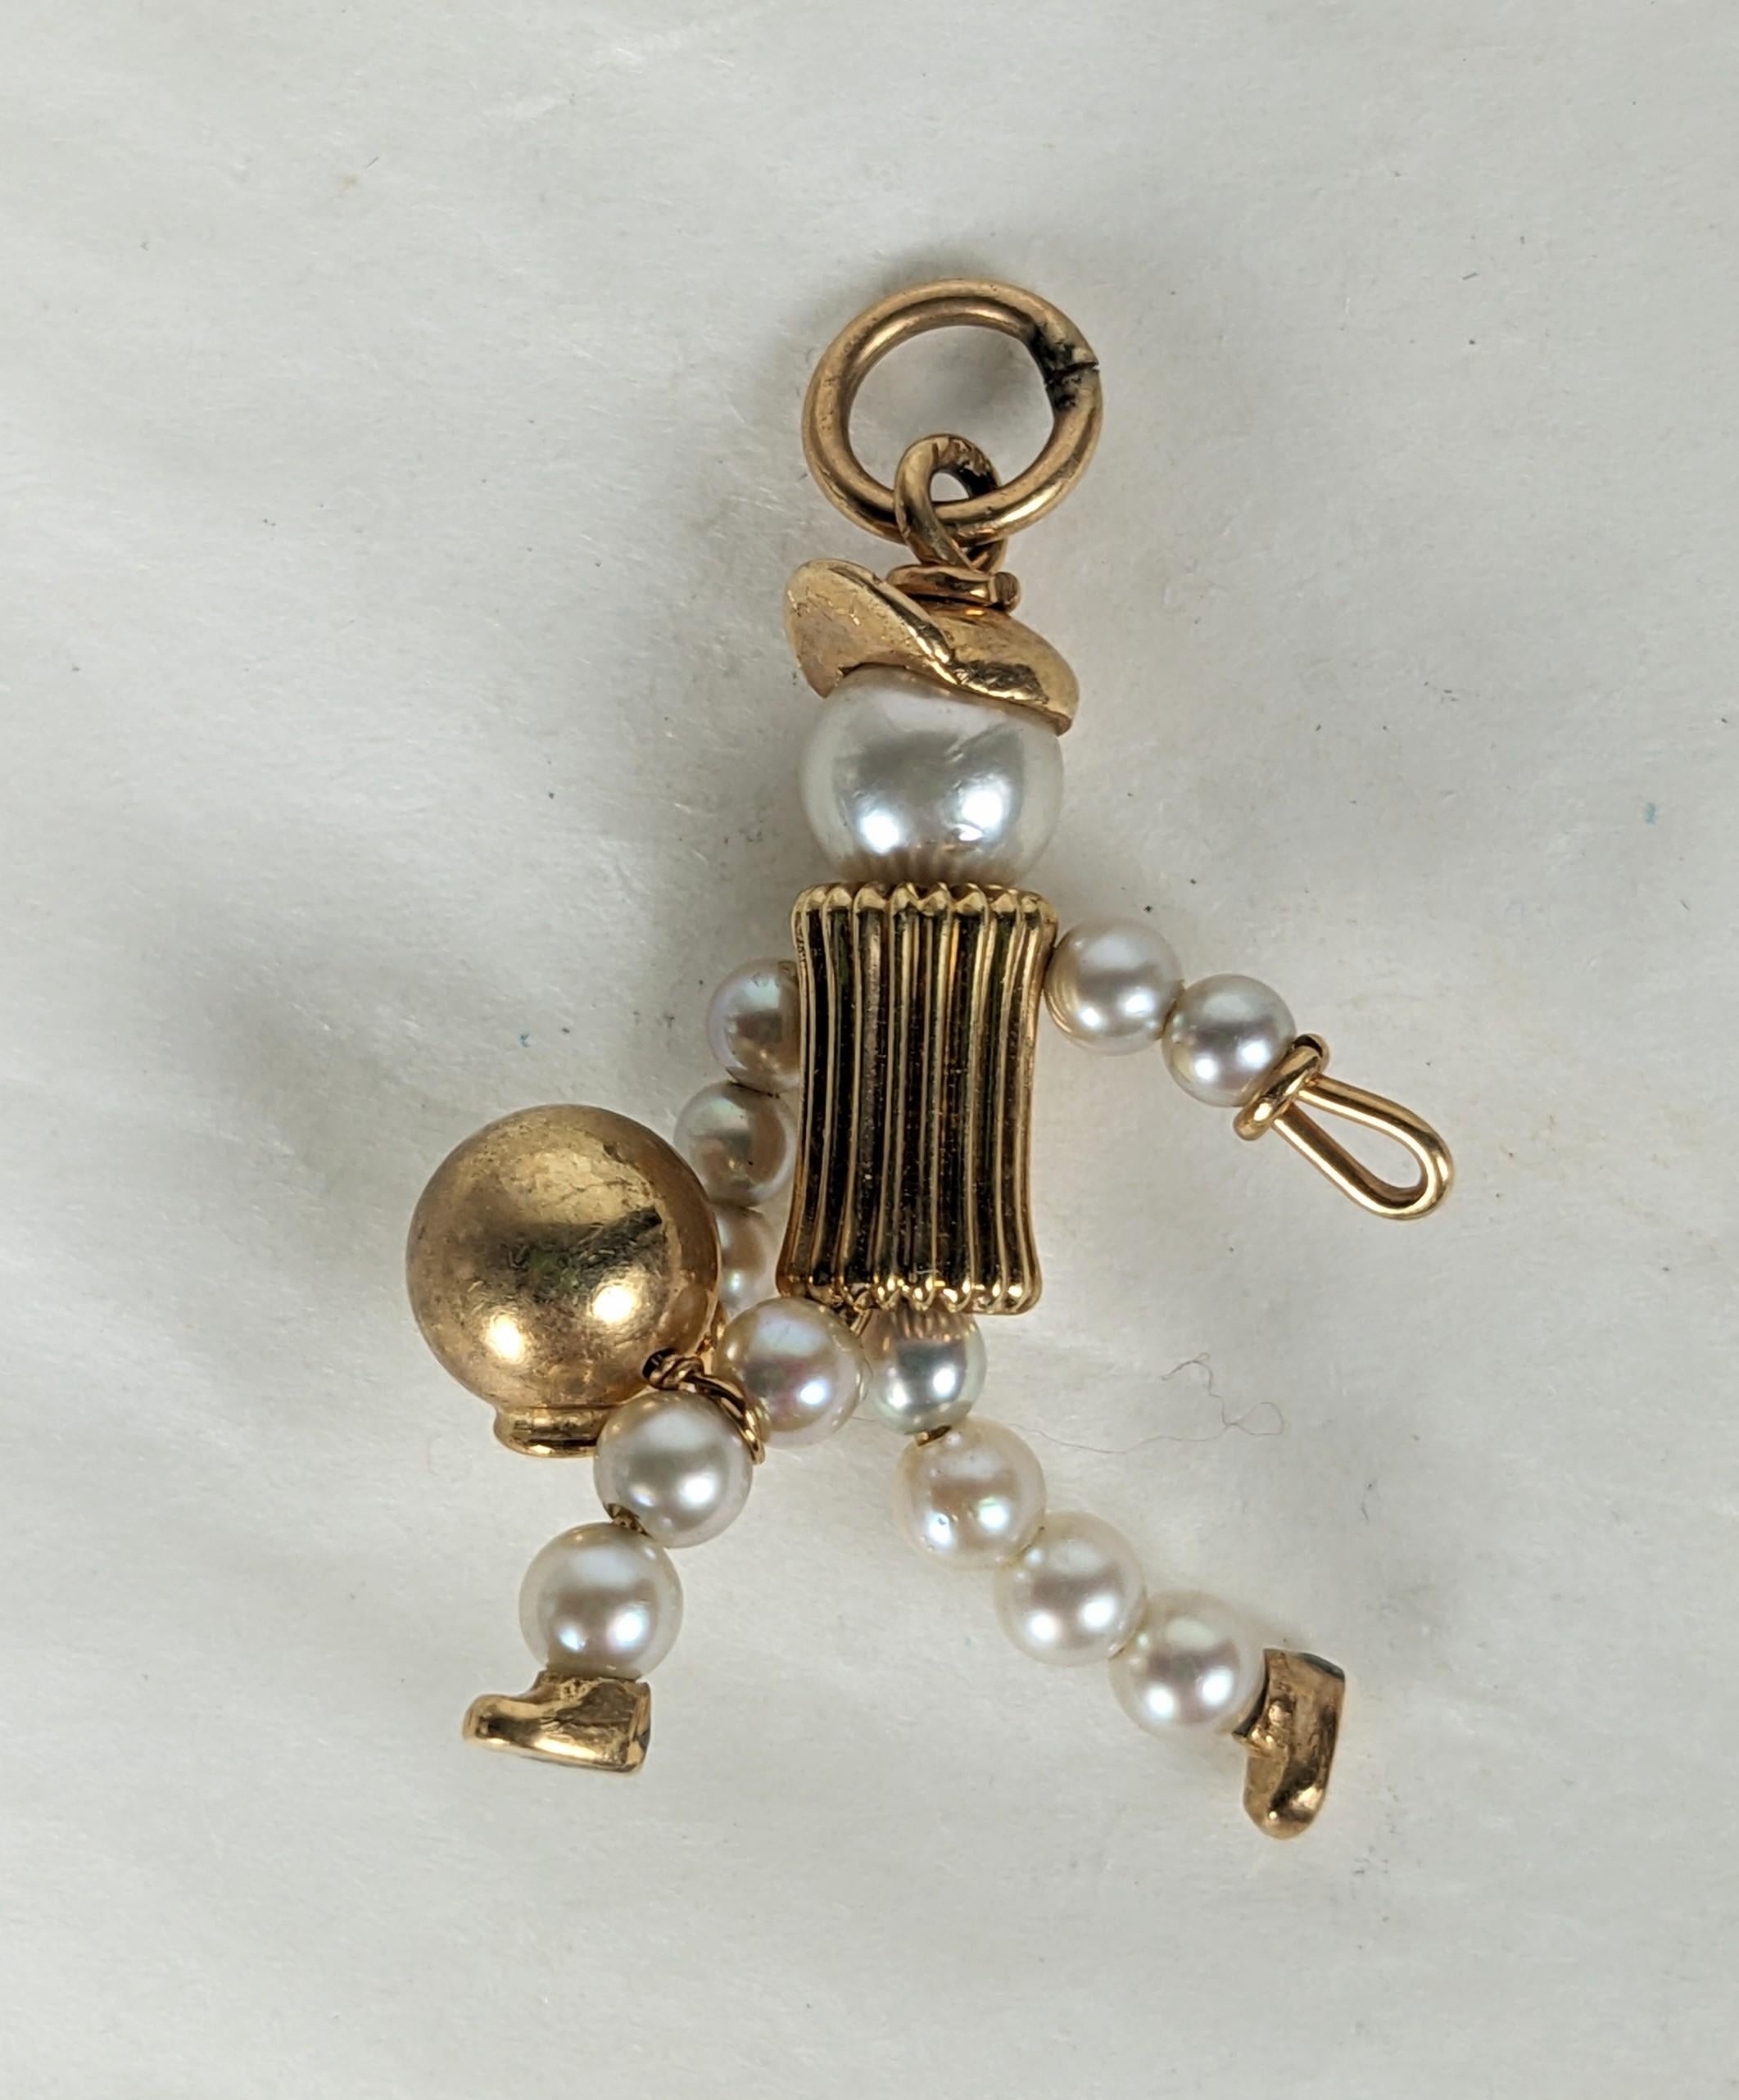 Charming Mid Century Gold and Pearl Bowler Charm of cast 14k gold elements and cultured pearls. Beautiful detailing and construction, 1950's USA. 1